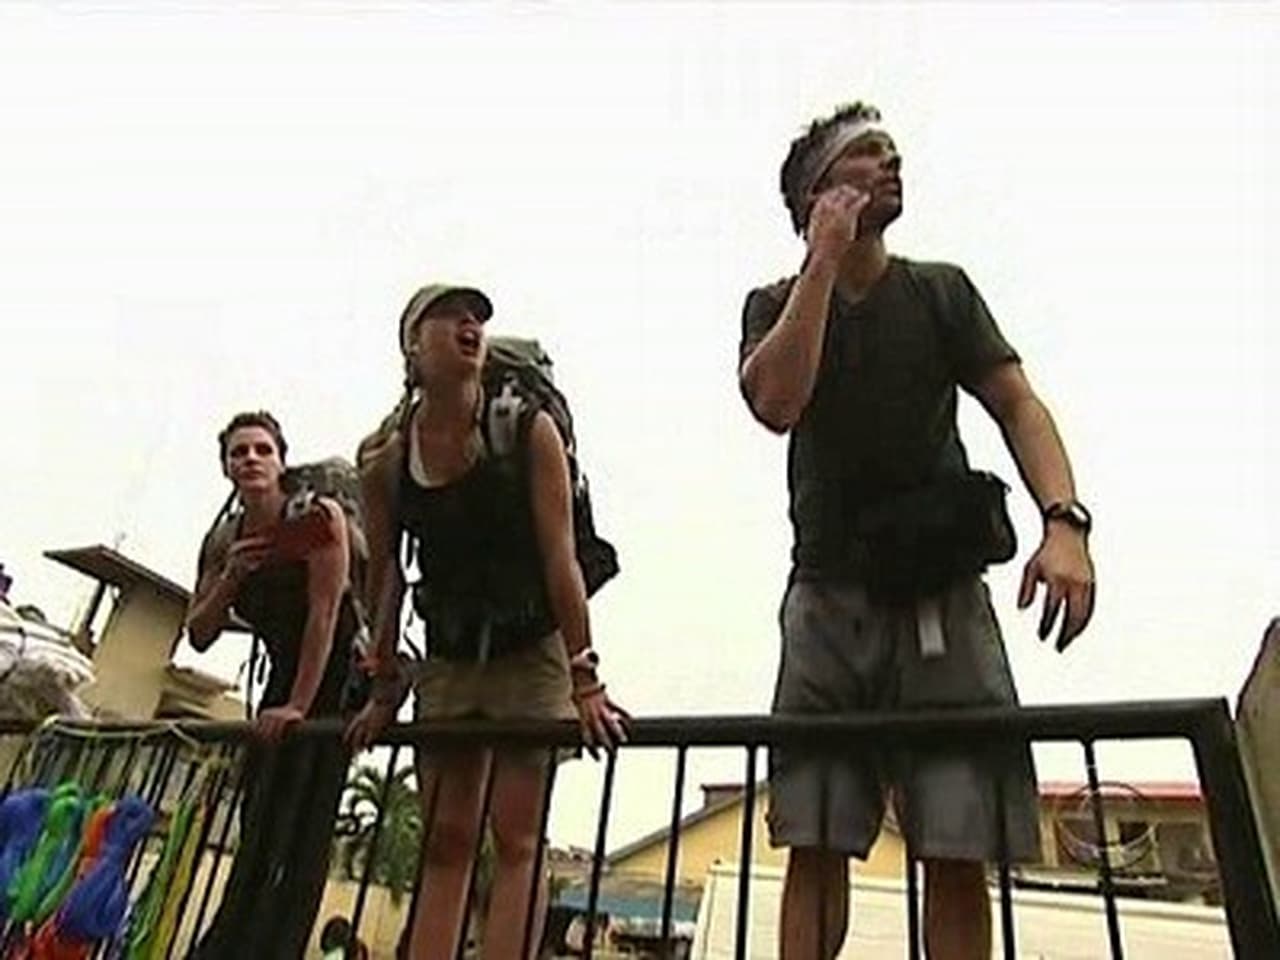 The Amazing Race - Season 17 Episode 2 : A Kiss Saves the Day